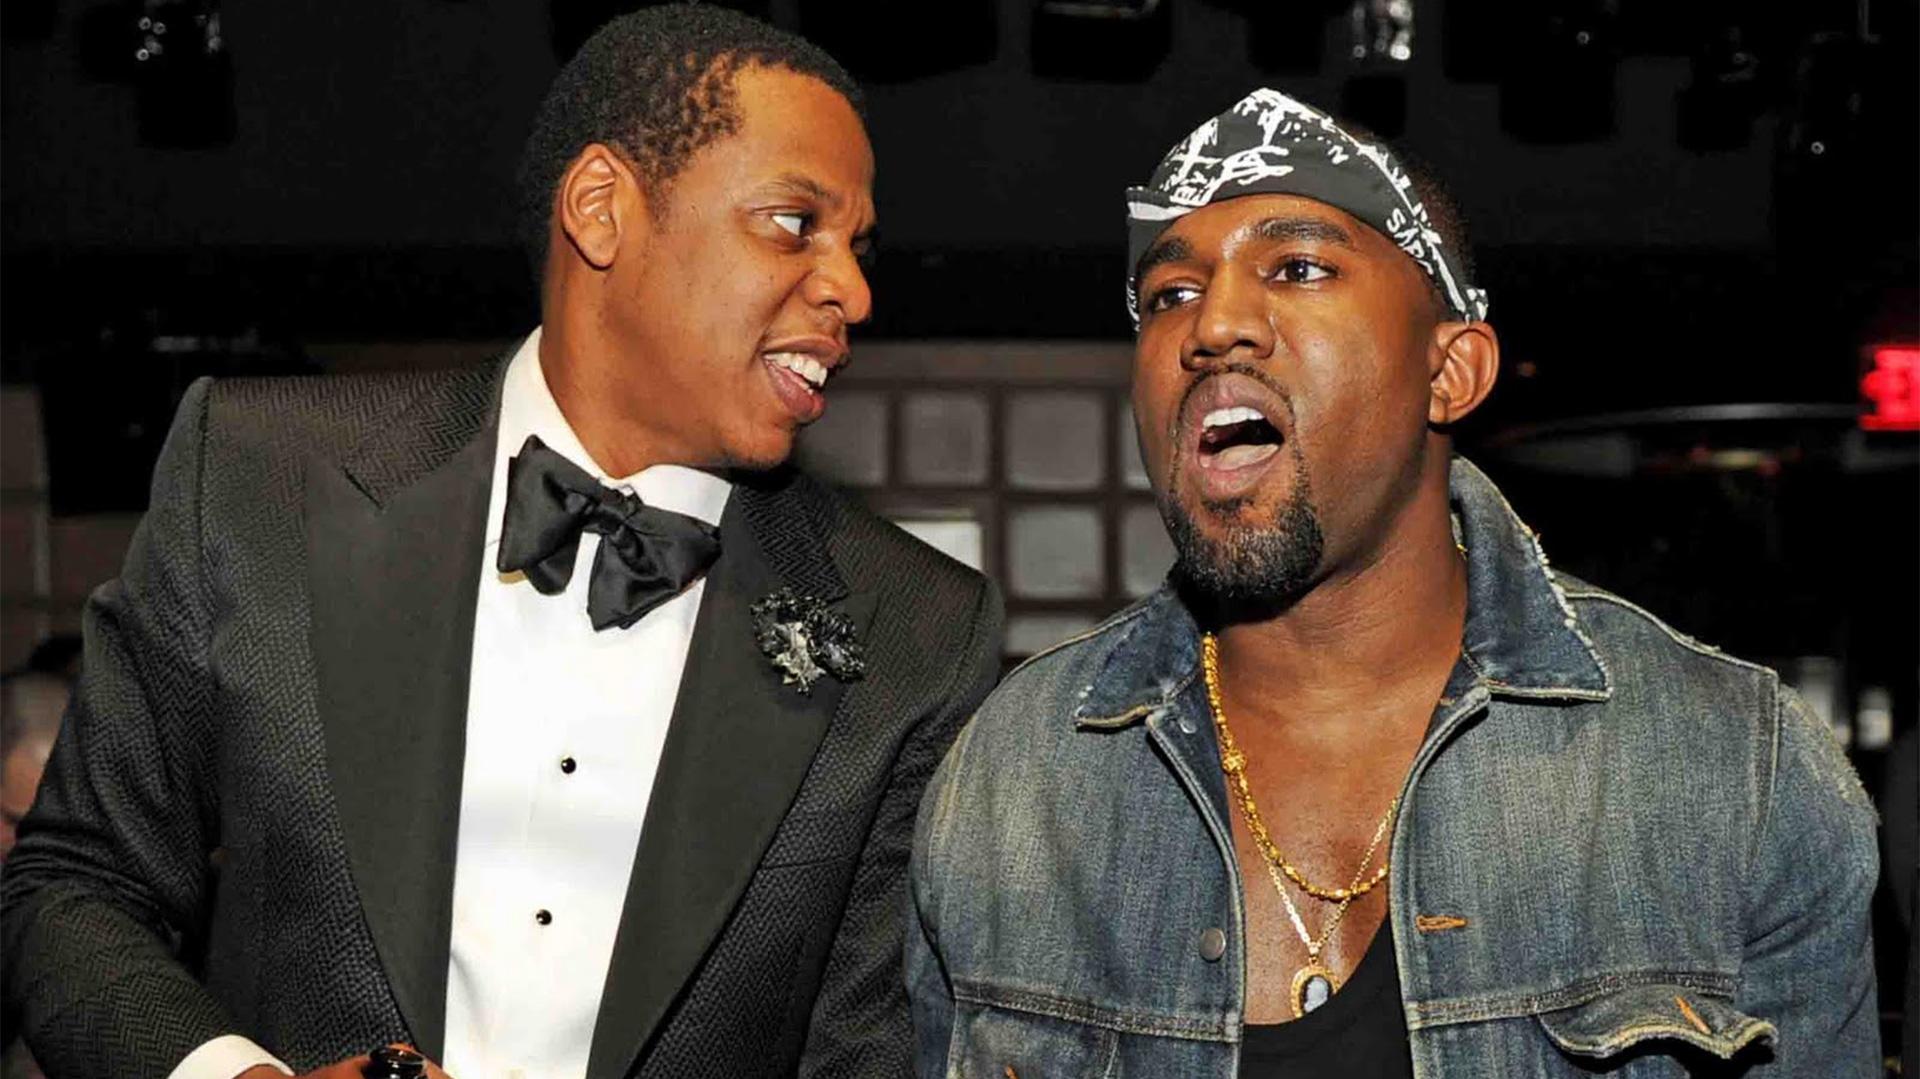 Jay Z And Kanye West Wallpaper For Mobile Phone